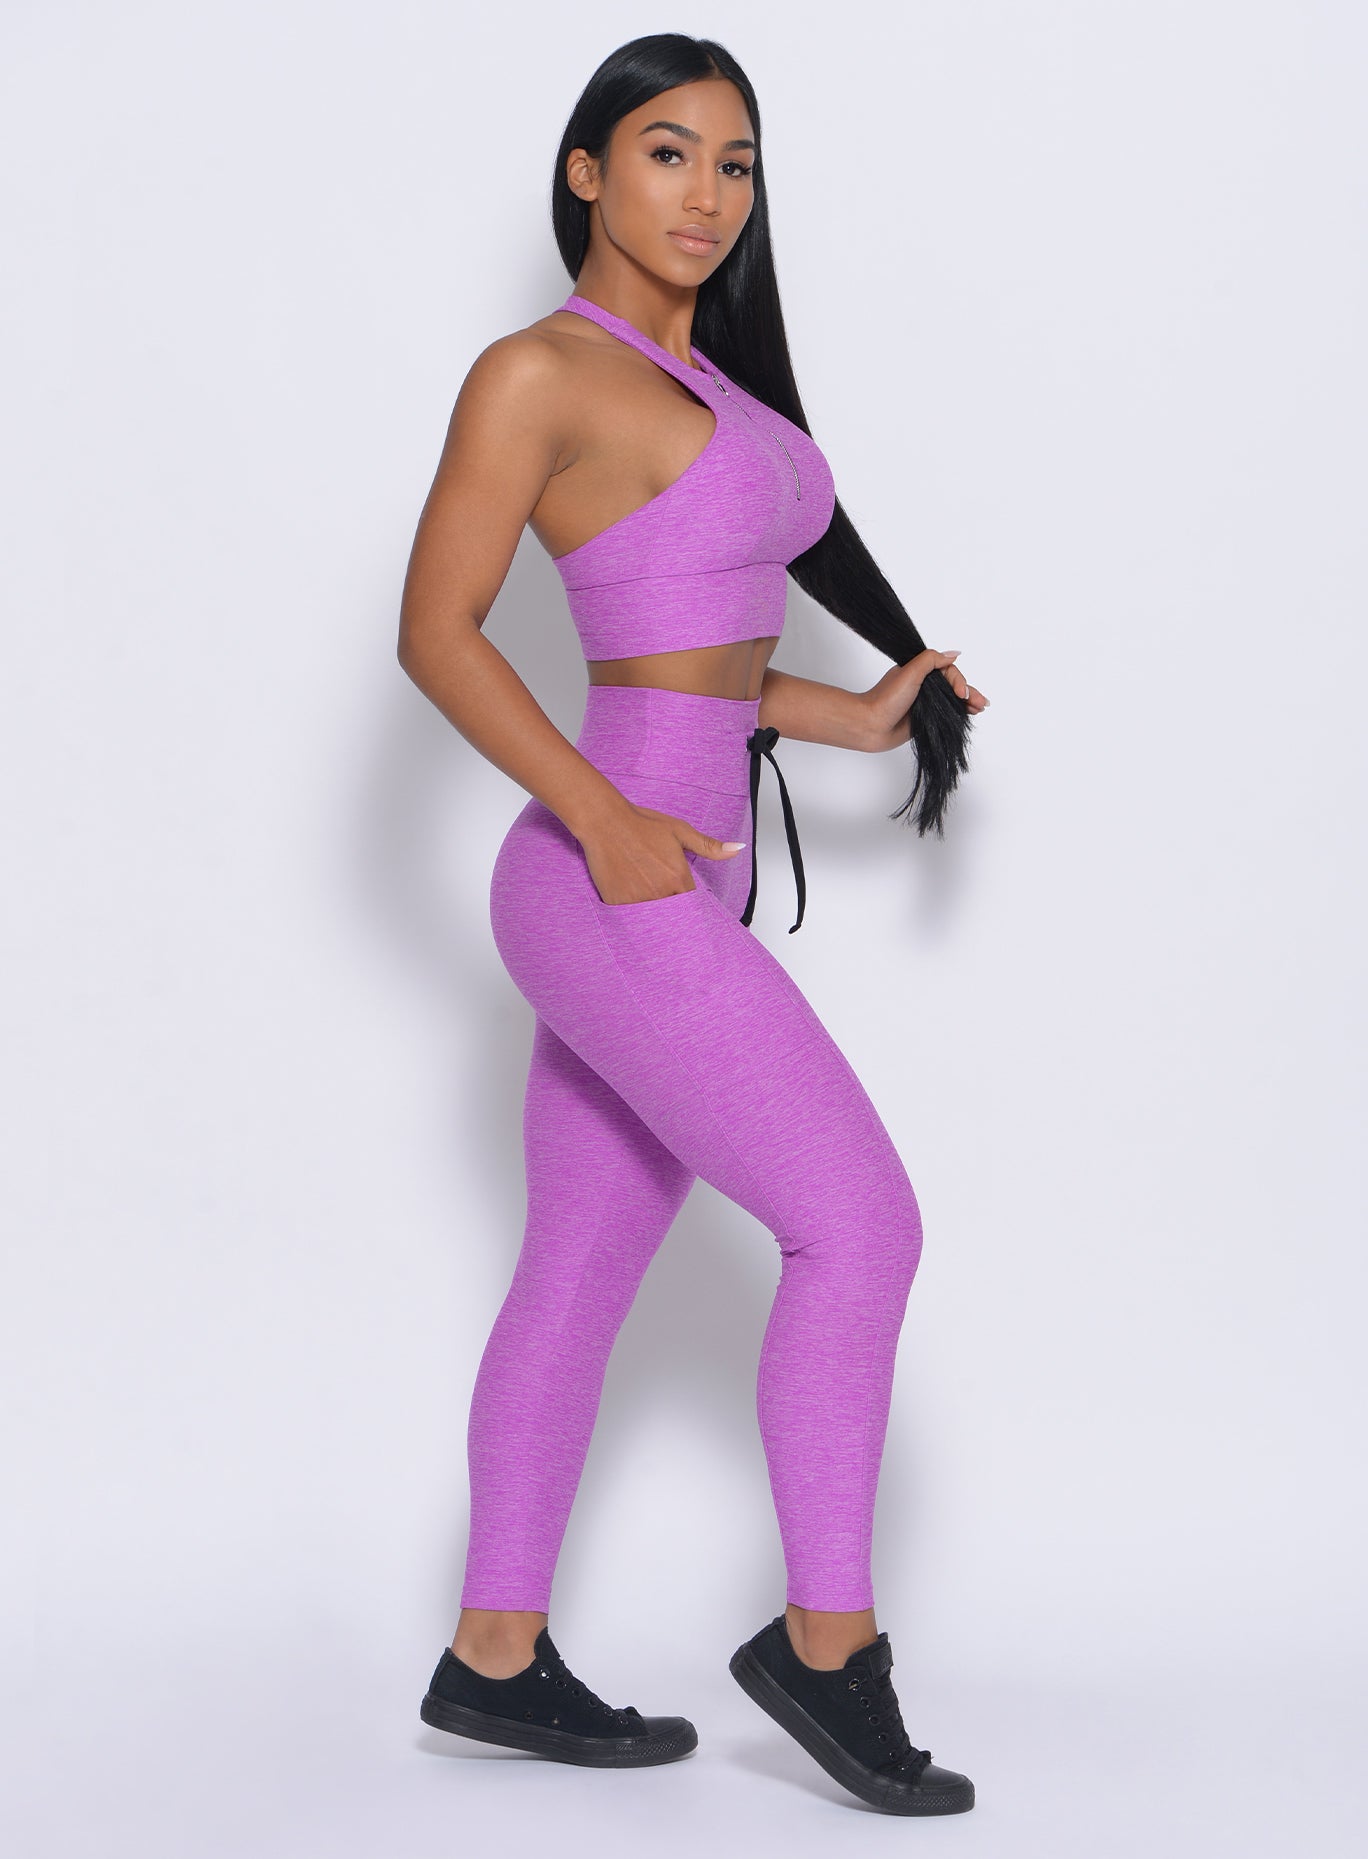 Right side view of the model facing to her right wearing our thrive leggings in purple color and a matching bra 